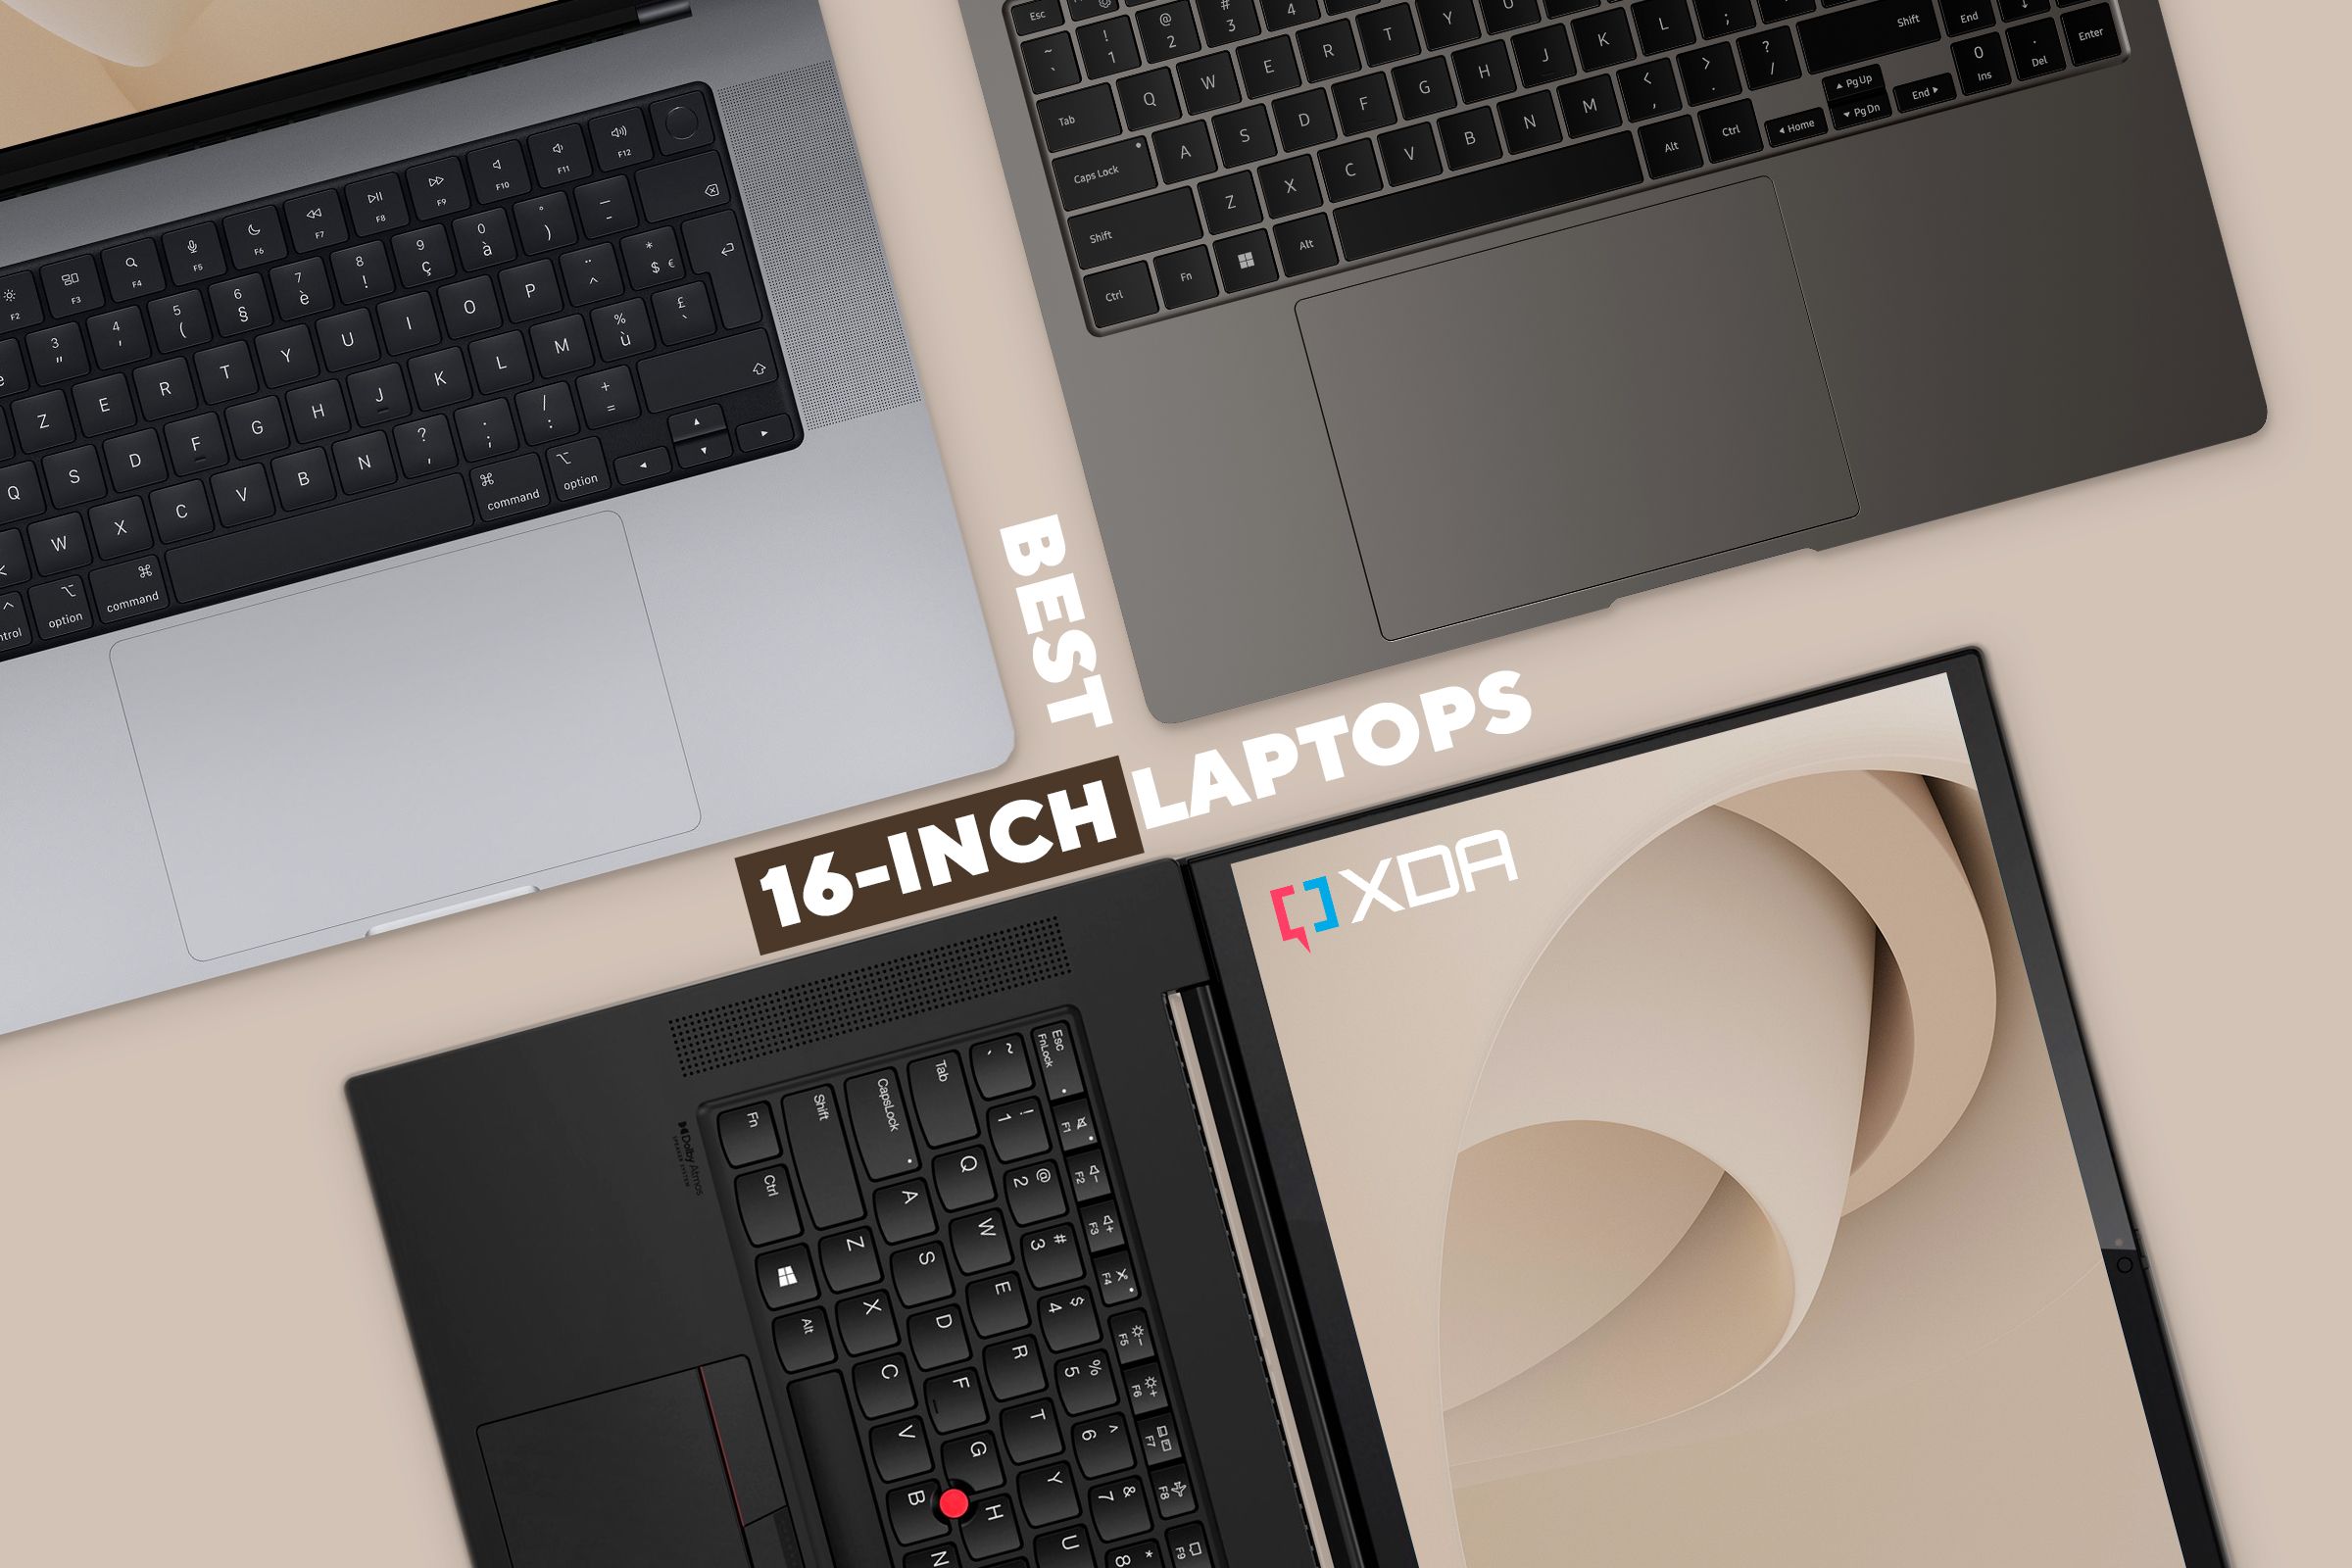 Images of various laptops with text saying 